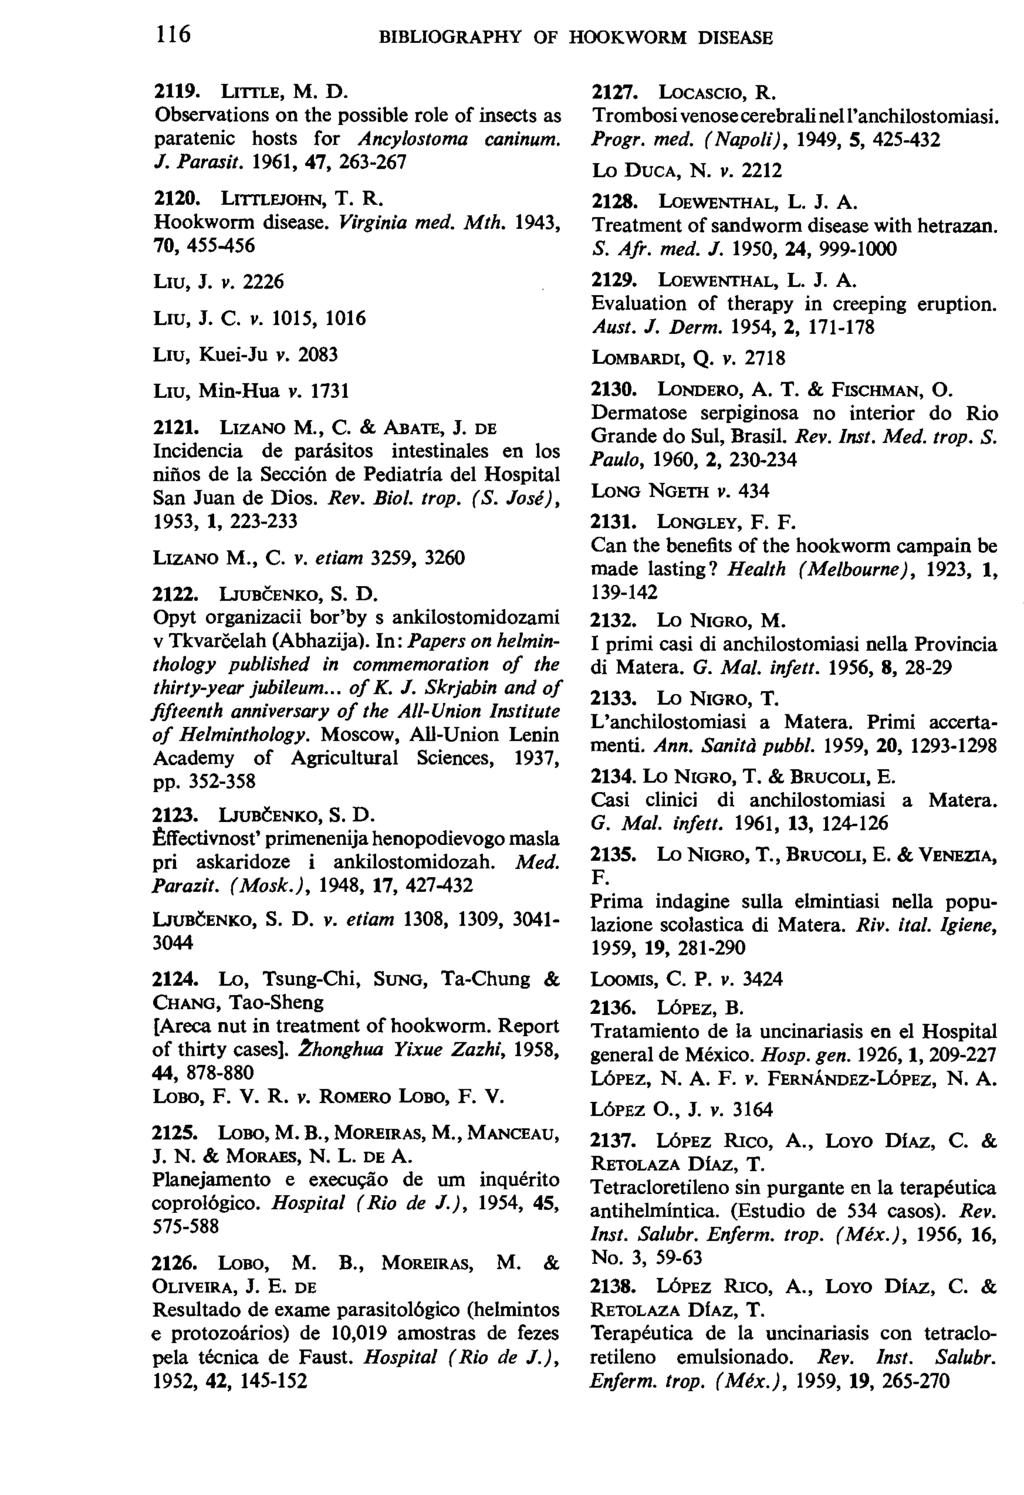 116 BIBLIOGRAPHY OF HOOKWORM DISEASE 2119. LITILE, M. D. Observations on the possible role of insects as paratenic hosts for Ancylostoma caninum. J. Parasit. 1961, 47, 263-267 2120. LI'ITLEJOHN, T. R.